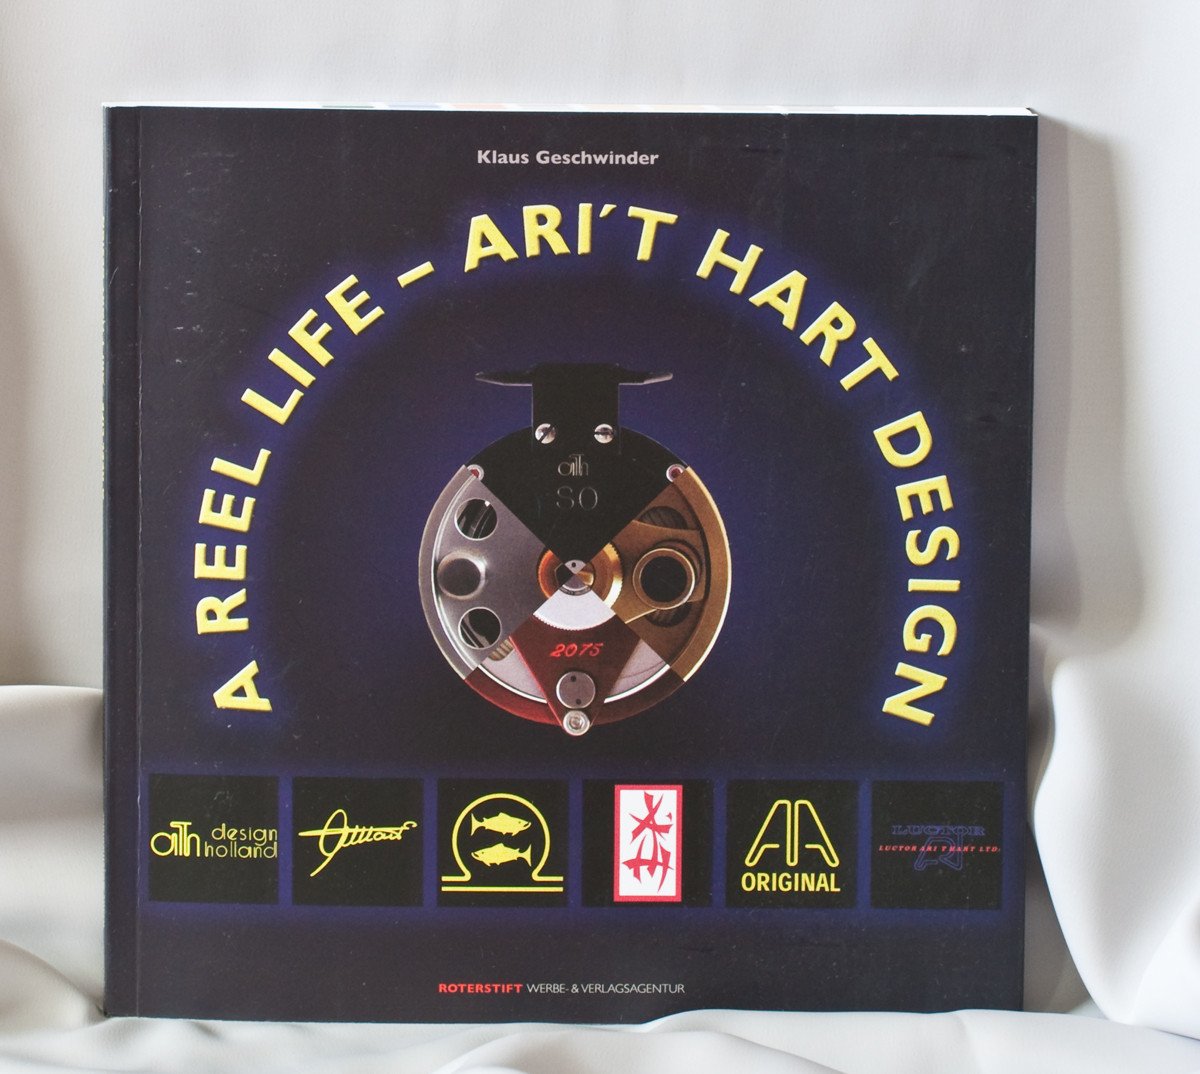 Fishing for History: The History of Fishing and Fishing Tackle: Thursday  Review: Klaus Geschwinder's A Reel Life: Ari'T Hart Design (2009)